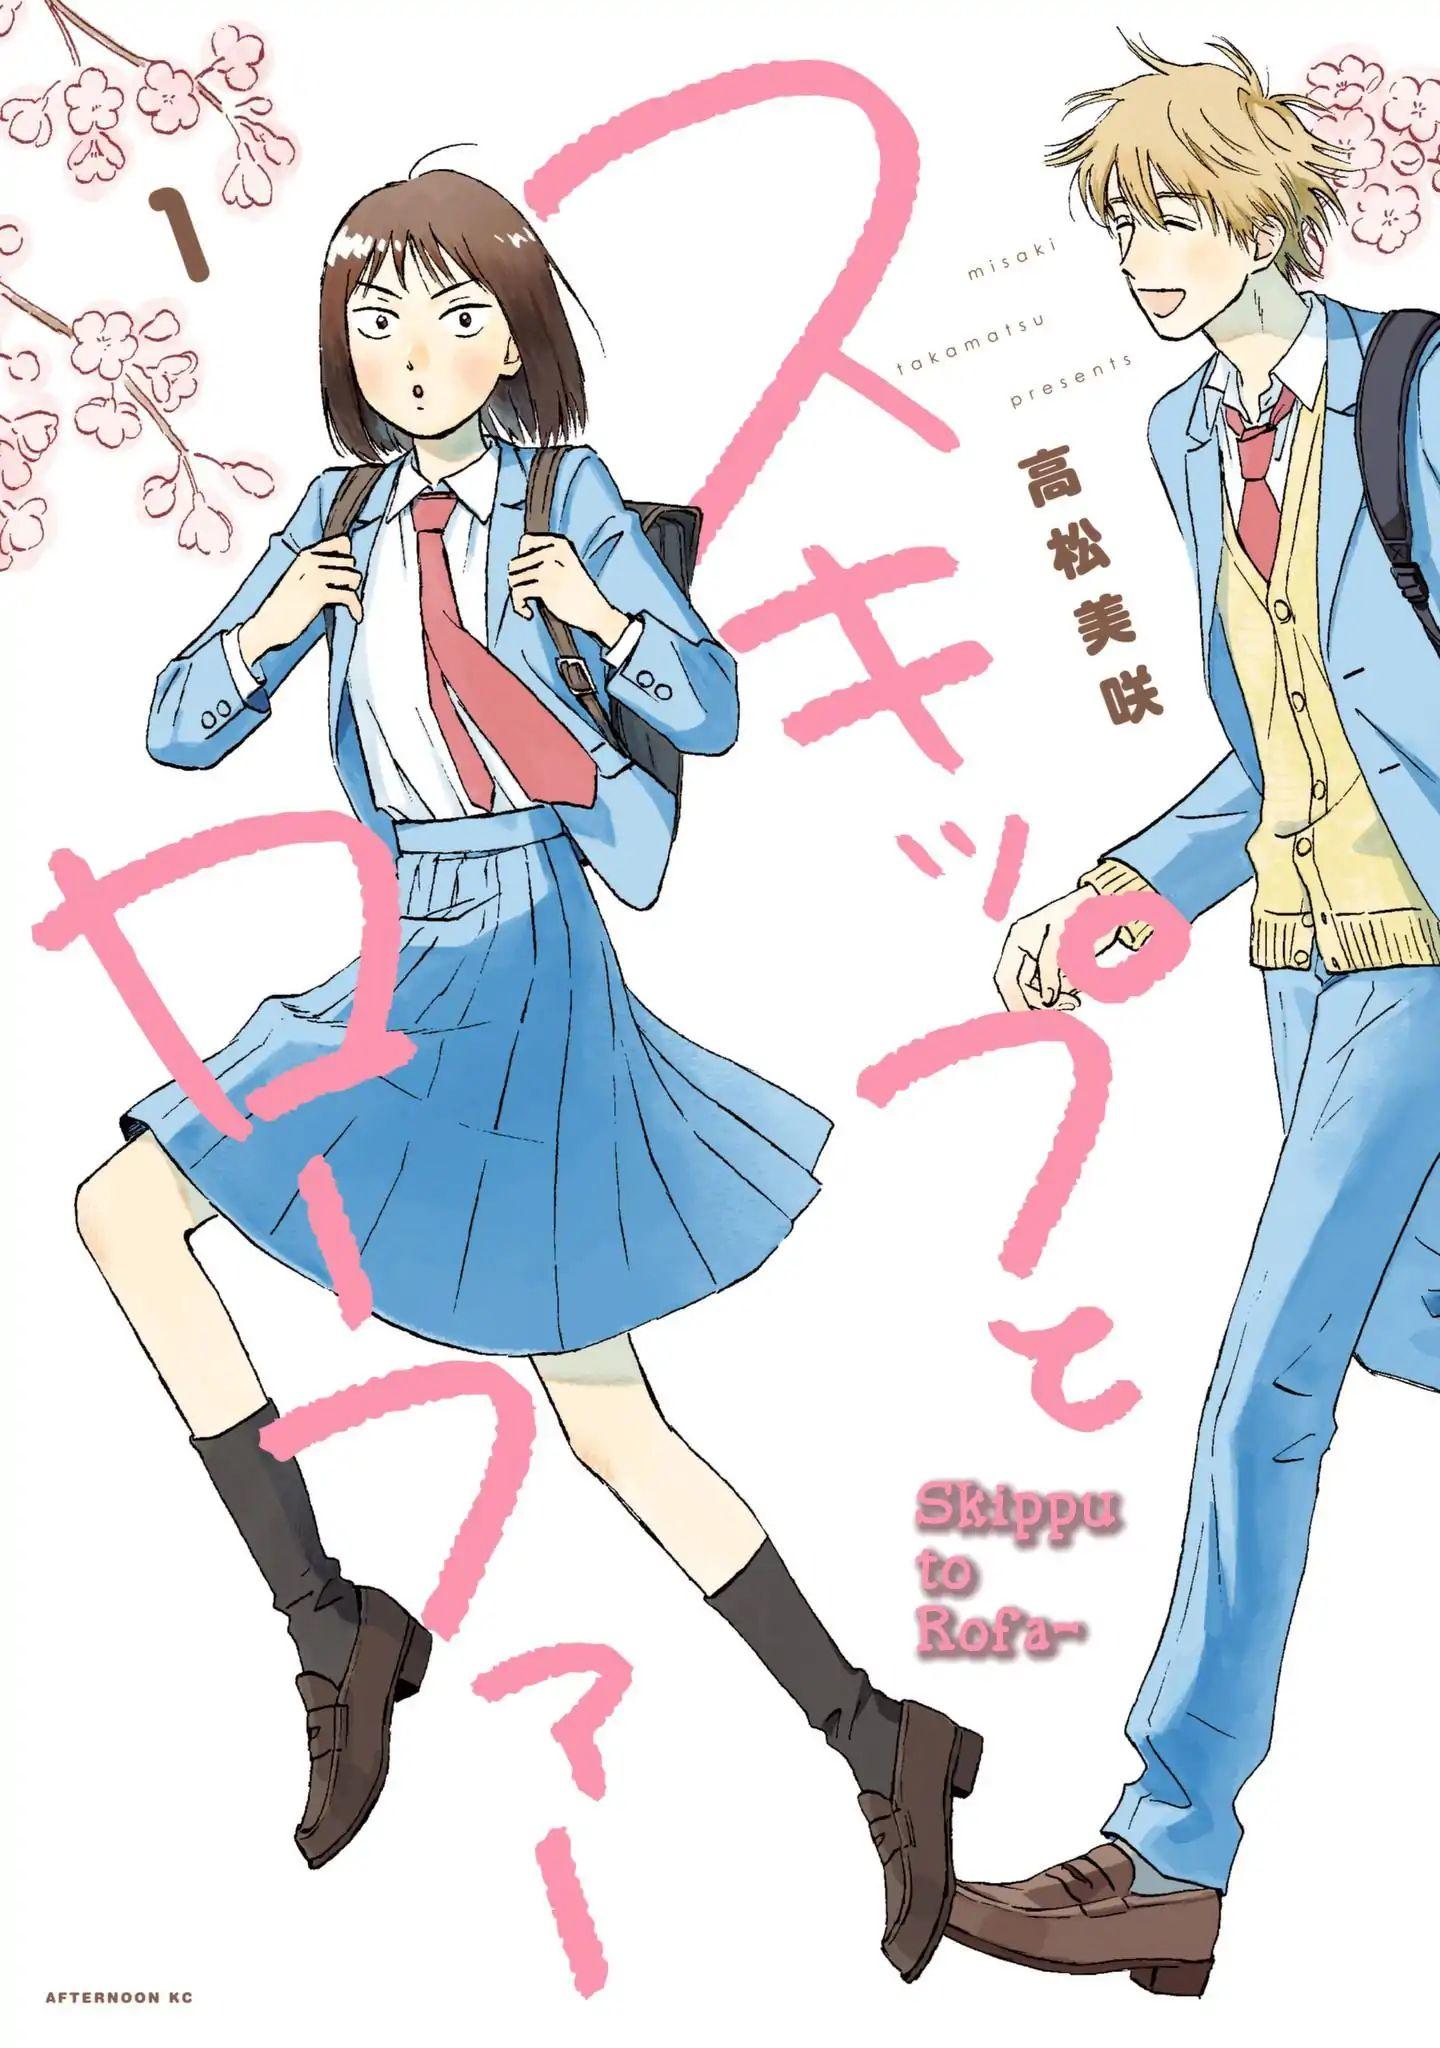 Skip To Loafer Chapter 1 Read Skip To Loafer Vol.1 Chapter 1: Sparkling High School Student on  Mangakakalot